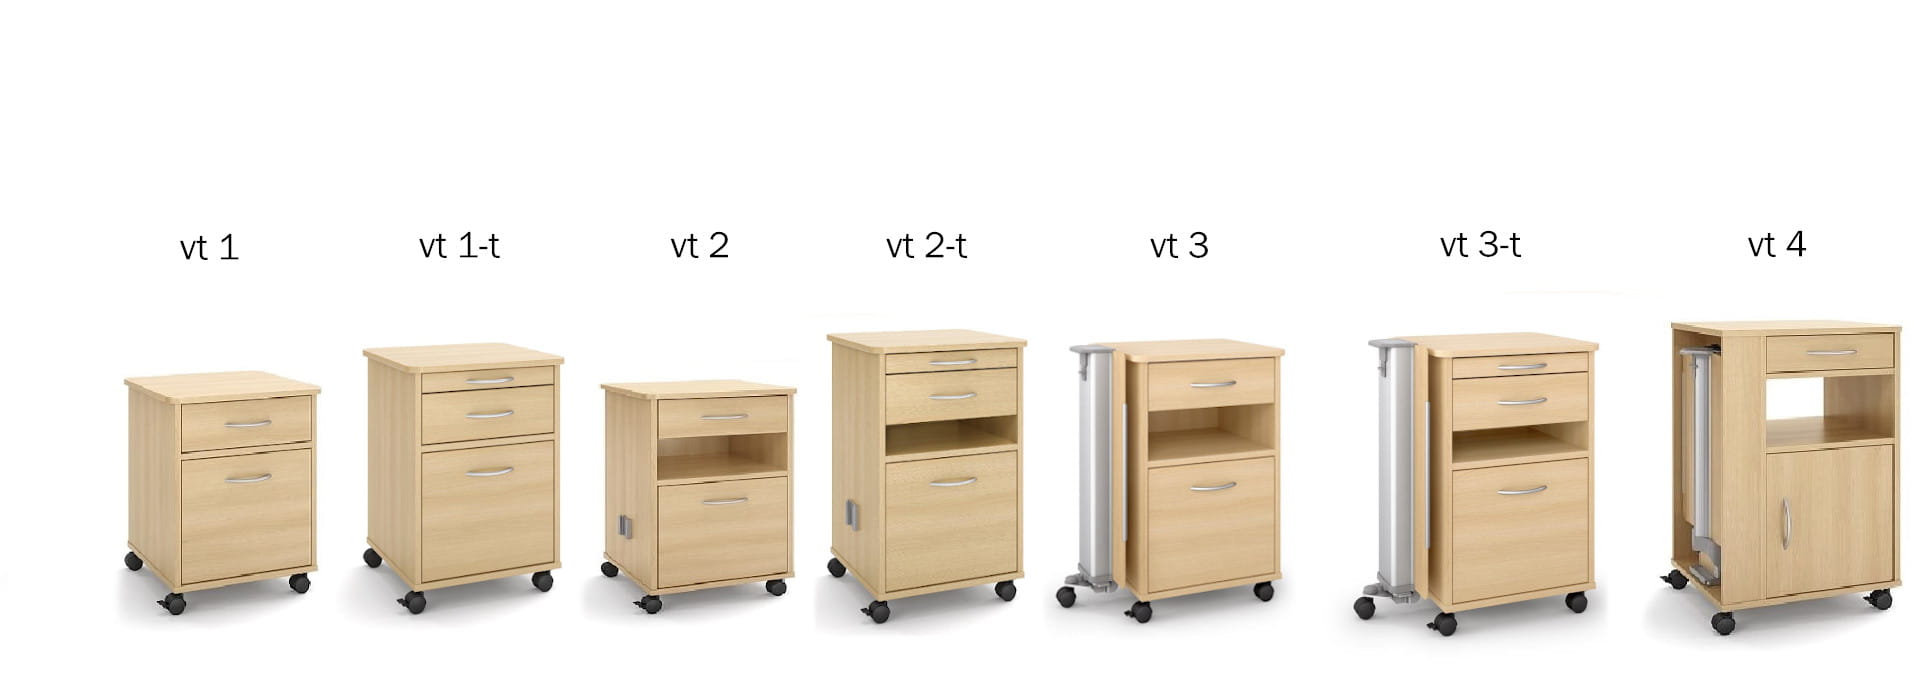 The vt bedside cabinet series is the budget-friendly basic model in the portfolio of wissner-bosserhoff bedside cabinets.